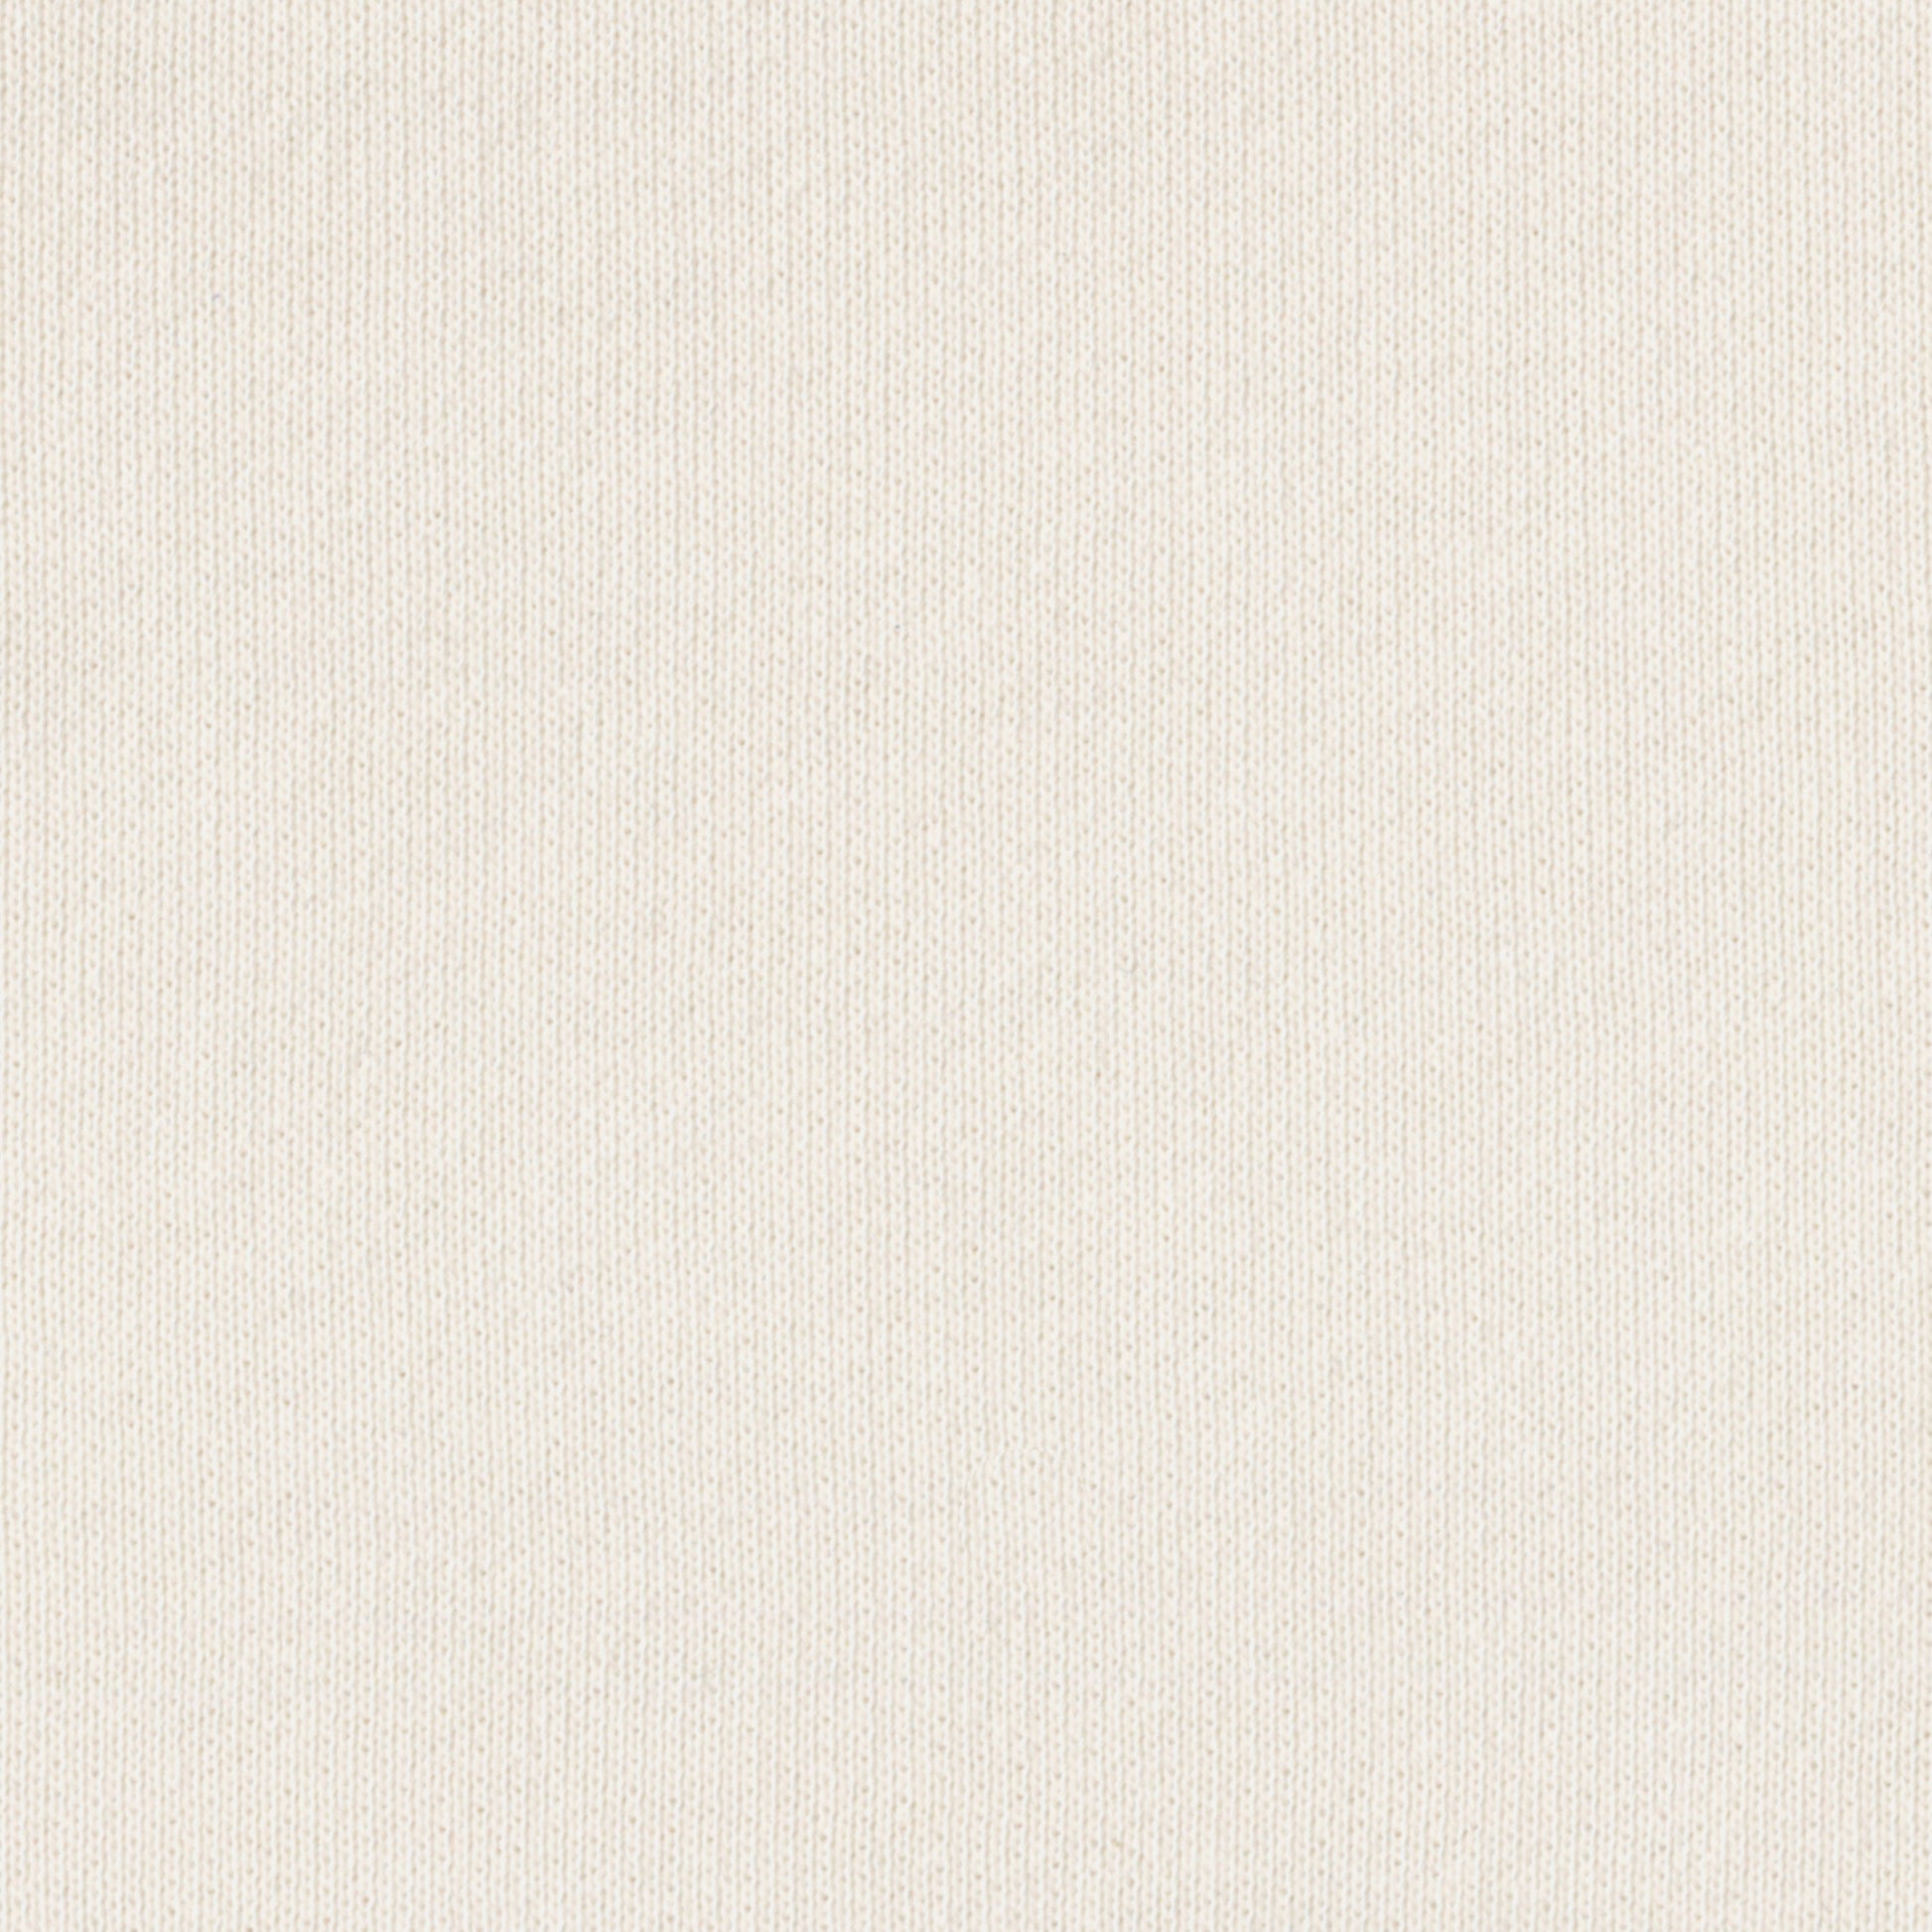 100% Organic Cotton French Terry - Ivory (2FT270)